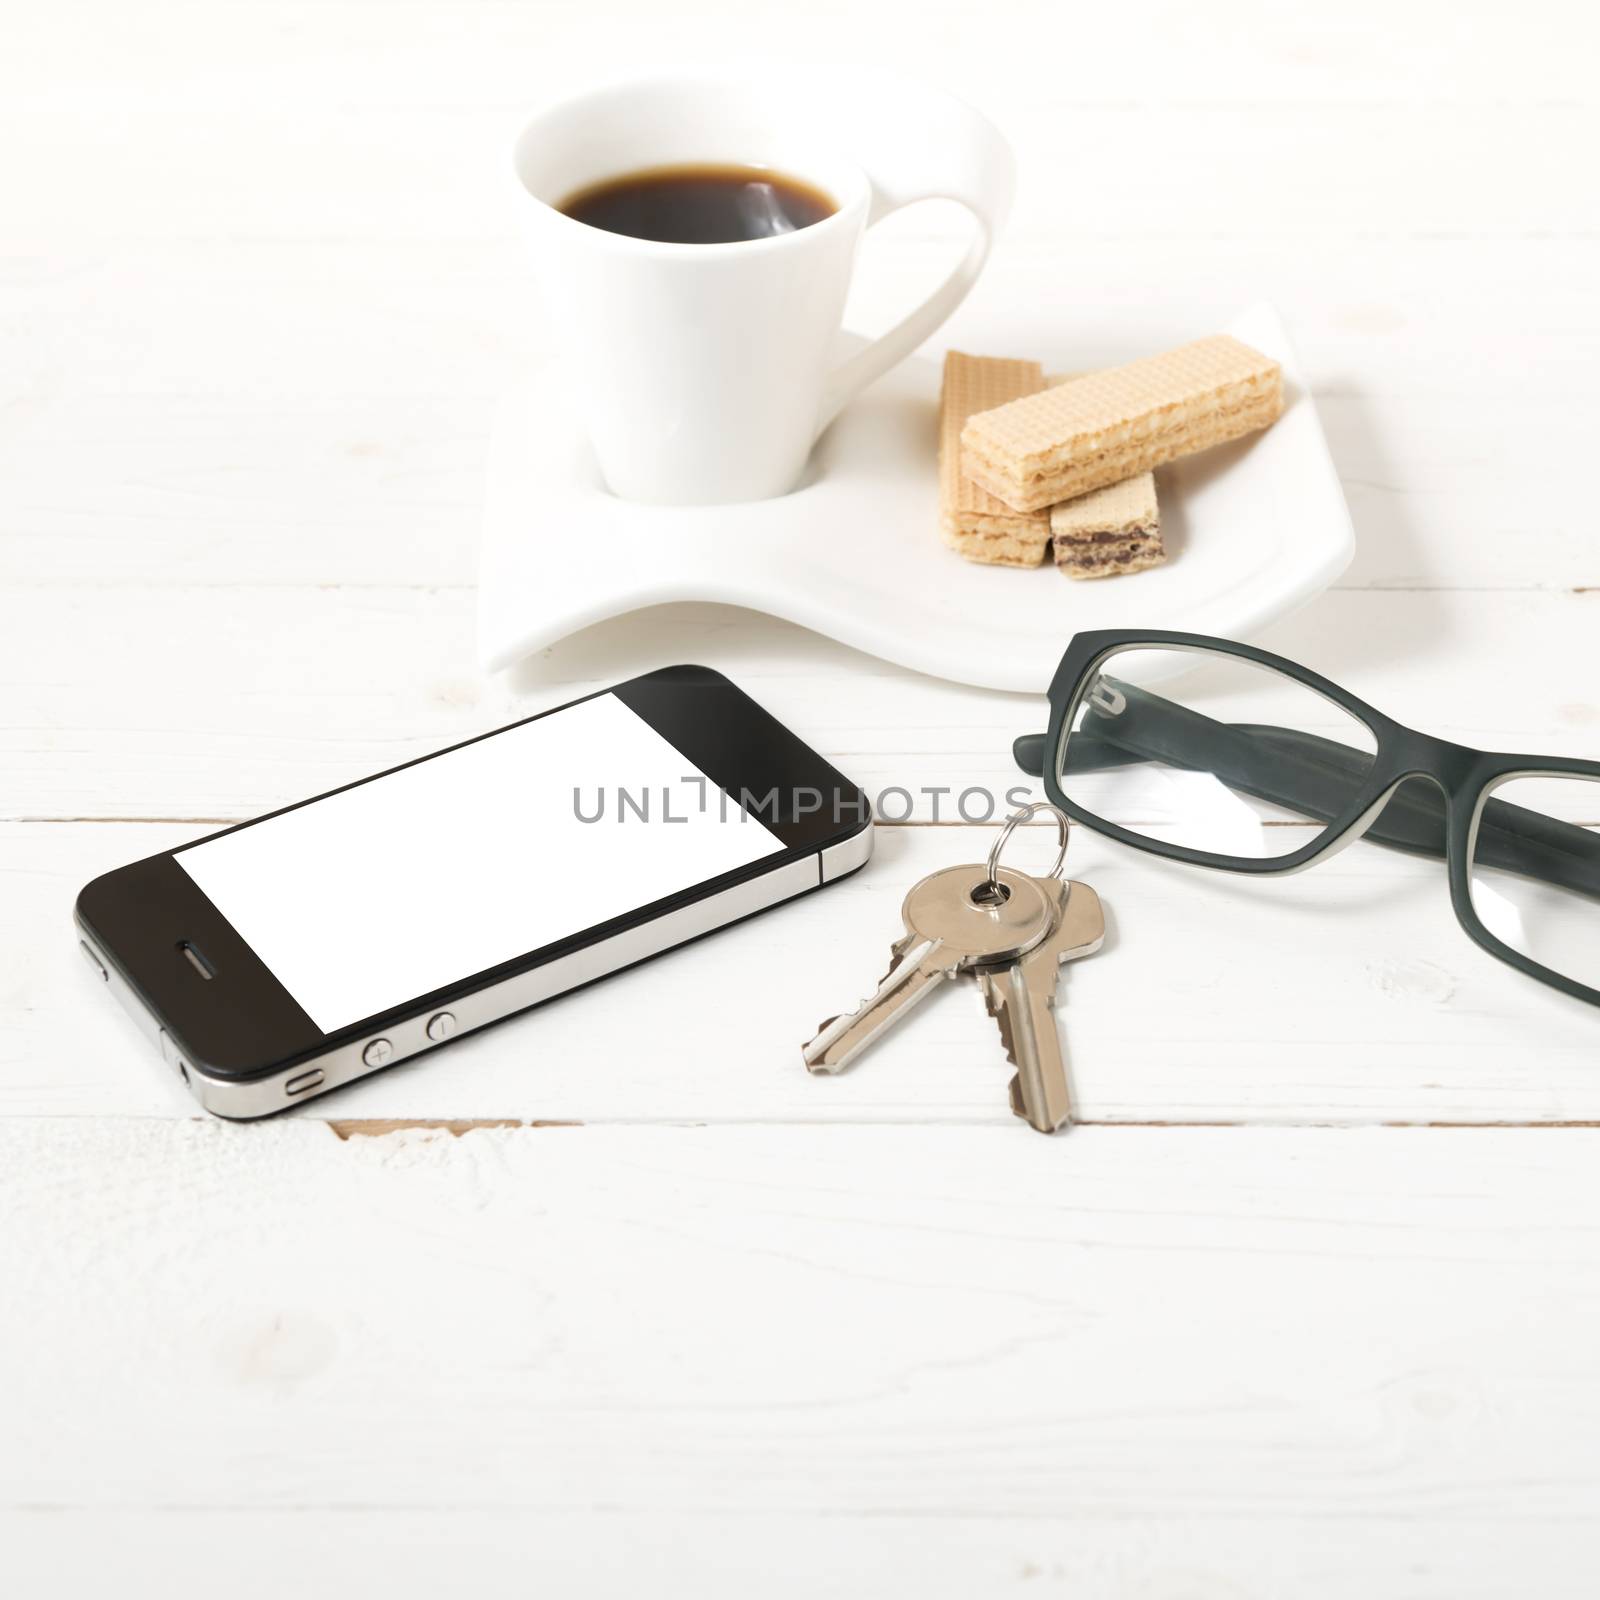 coffee cup with wafer,phone,key,eyeglasses on white wood background